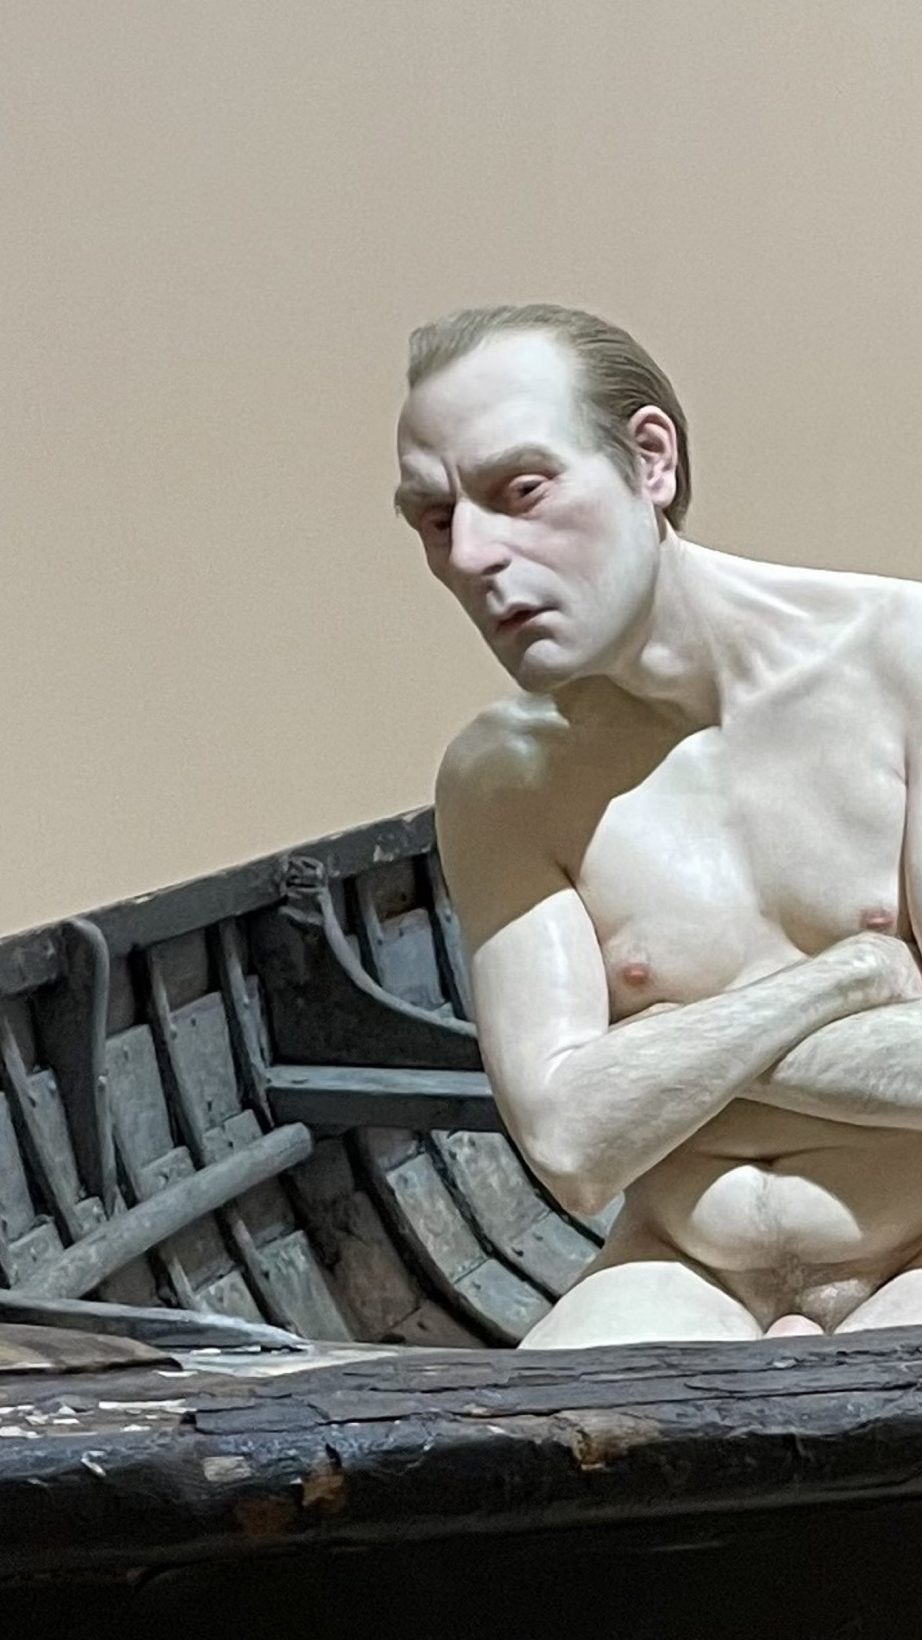 Paris. Ron Mueck, a visual and emotional experience